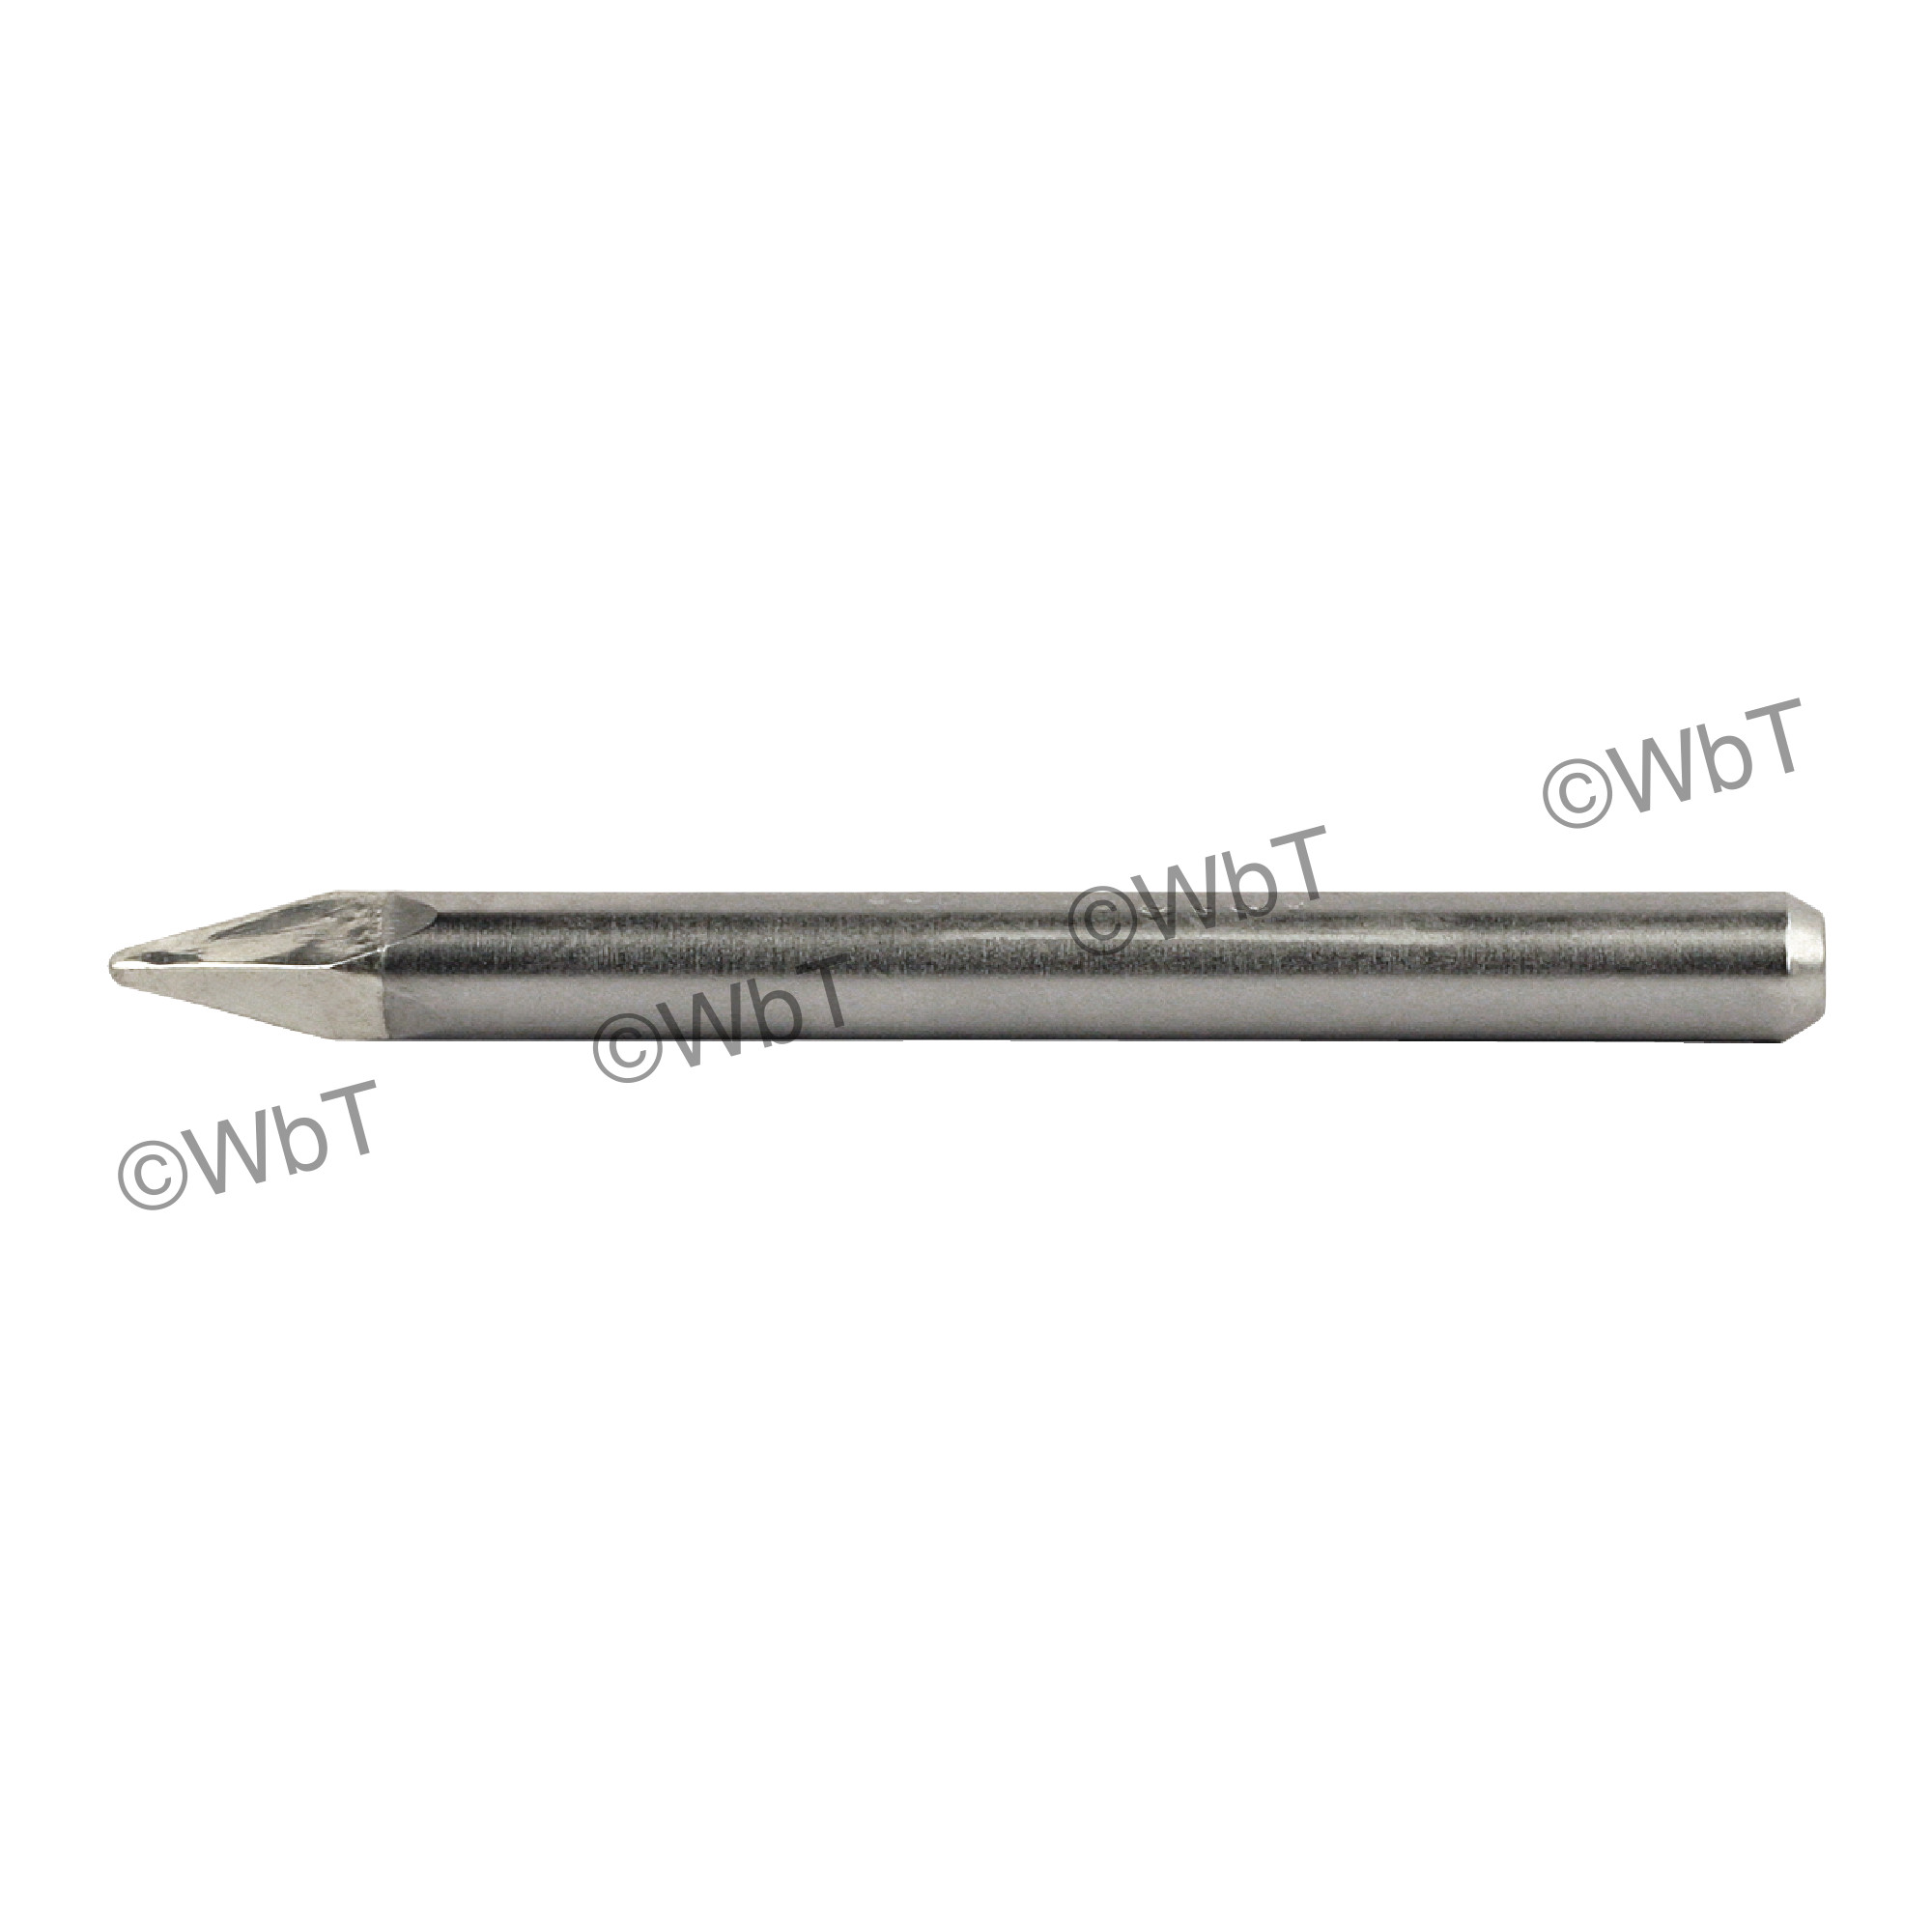 Diamond Style Replacement Soldering Iron Tip For Model #3138